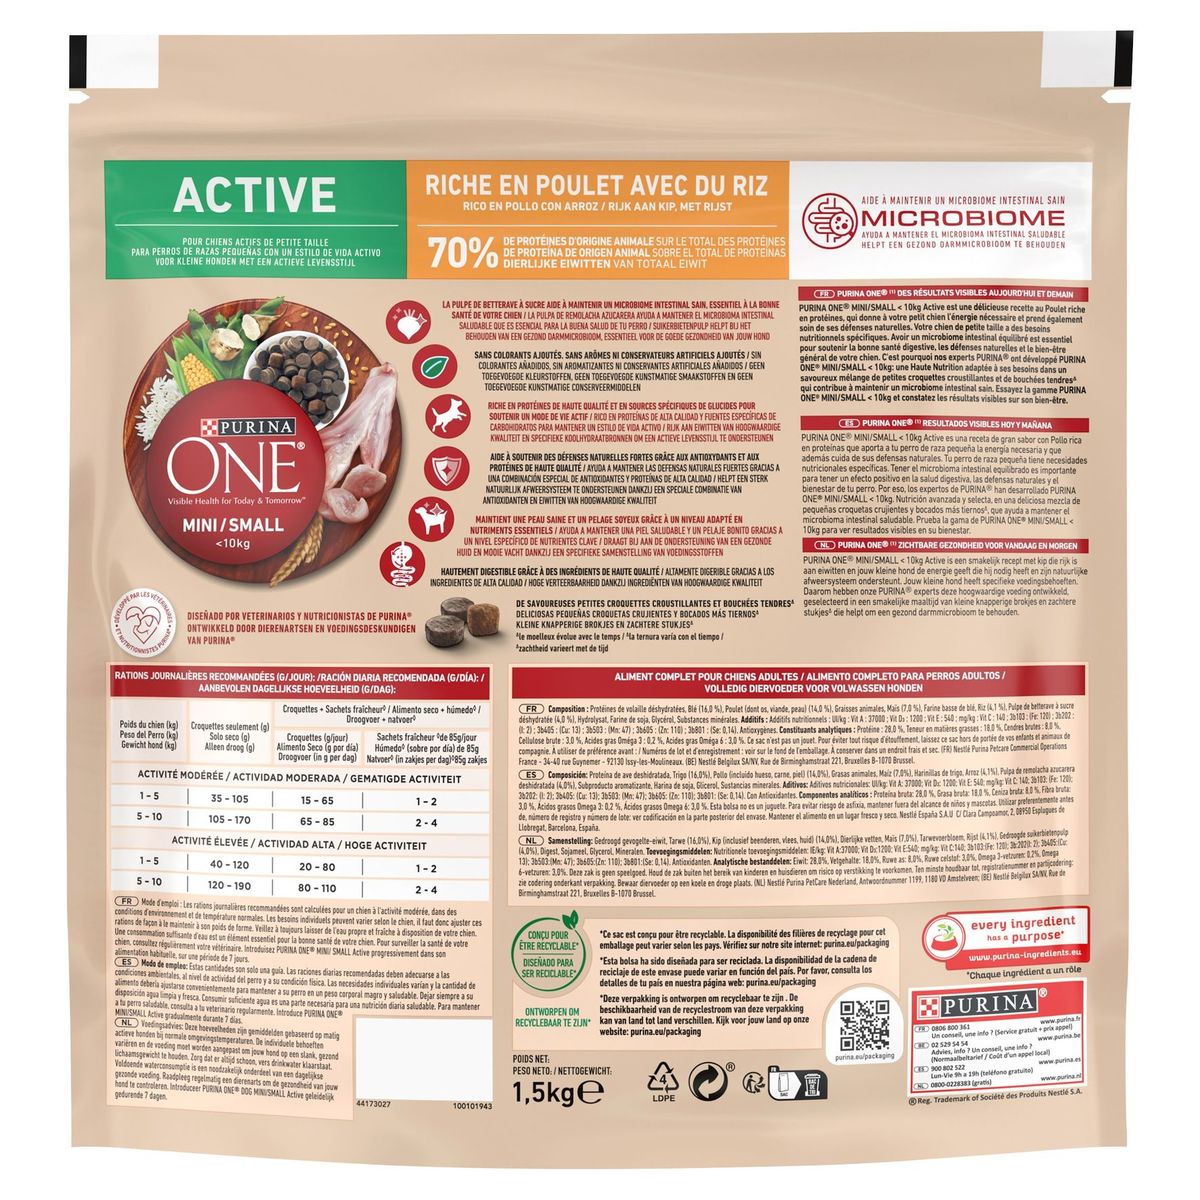 Purina One Mini / Small <10 kg Active 1.5 kg